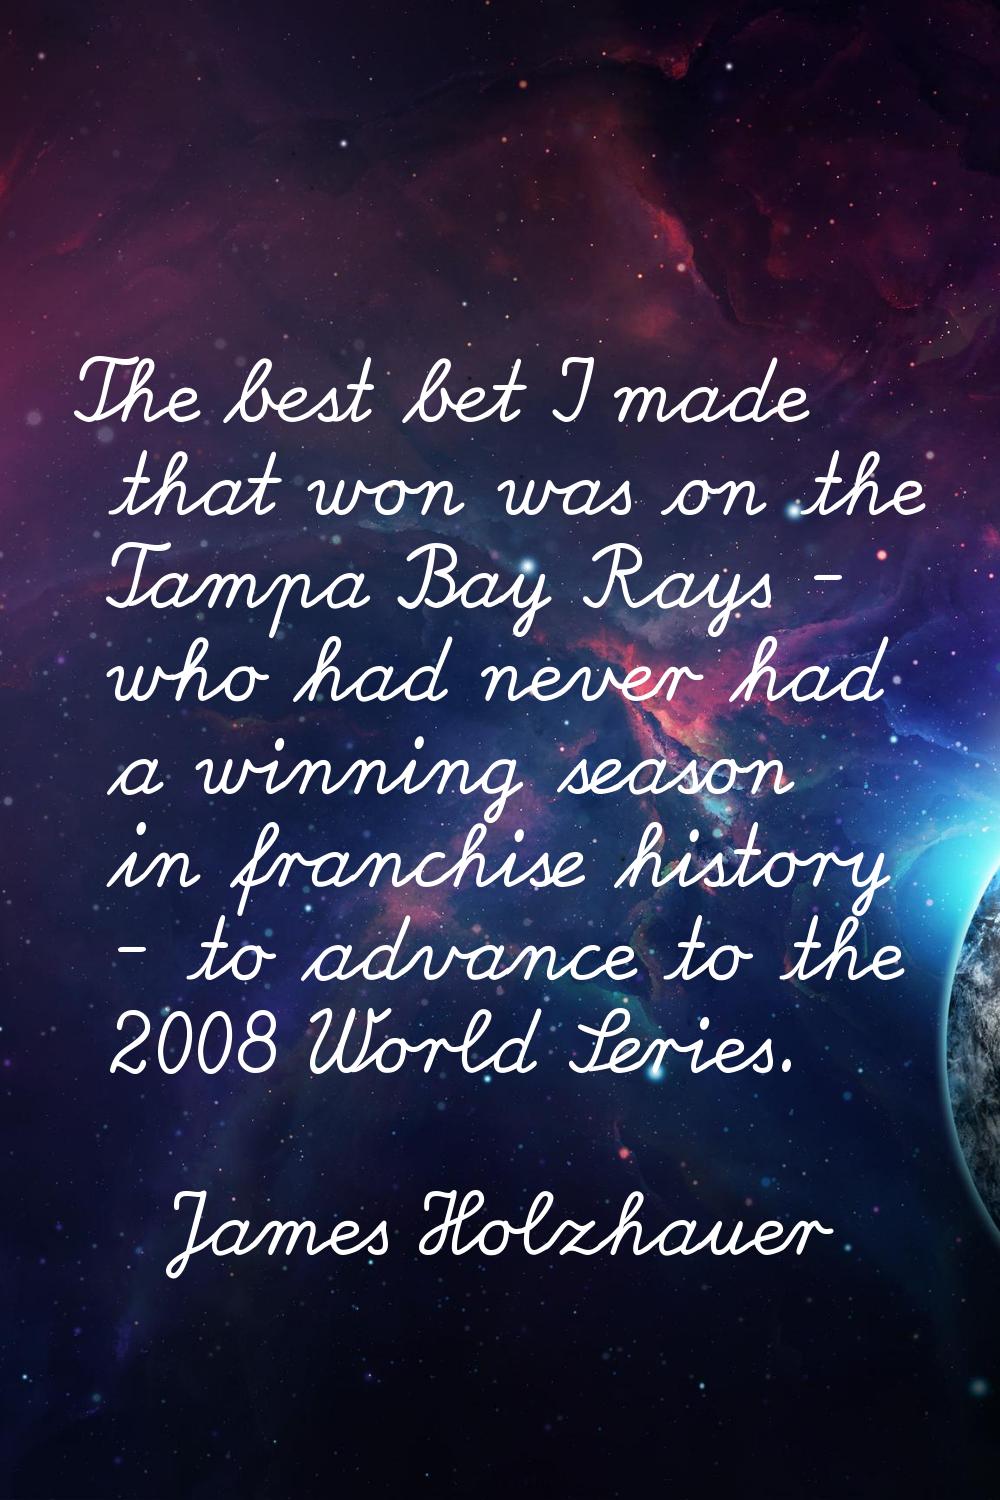 The best bet I made that won was on the Tampa Bay Rays - who had never had a winning season in fran